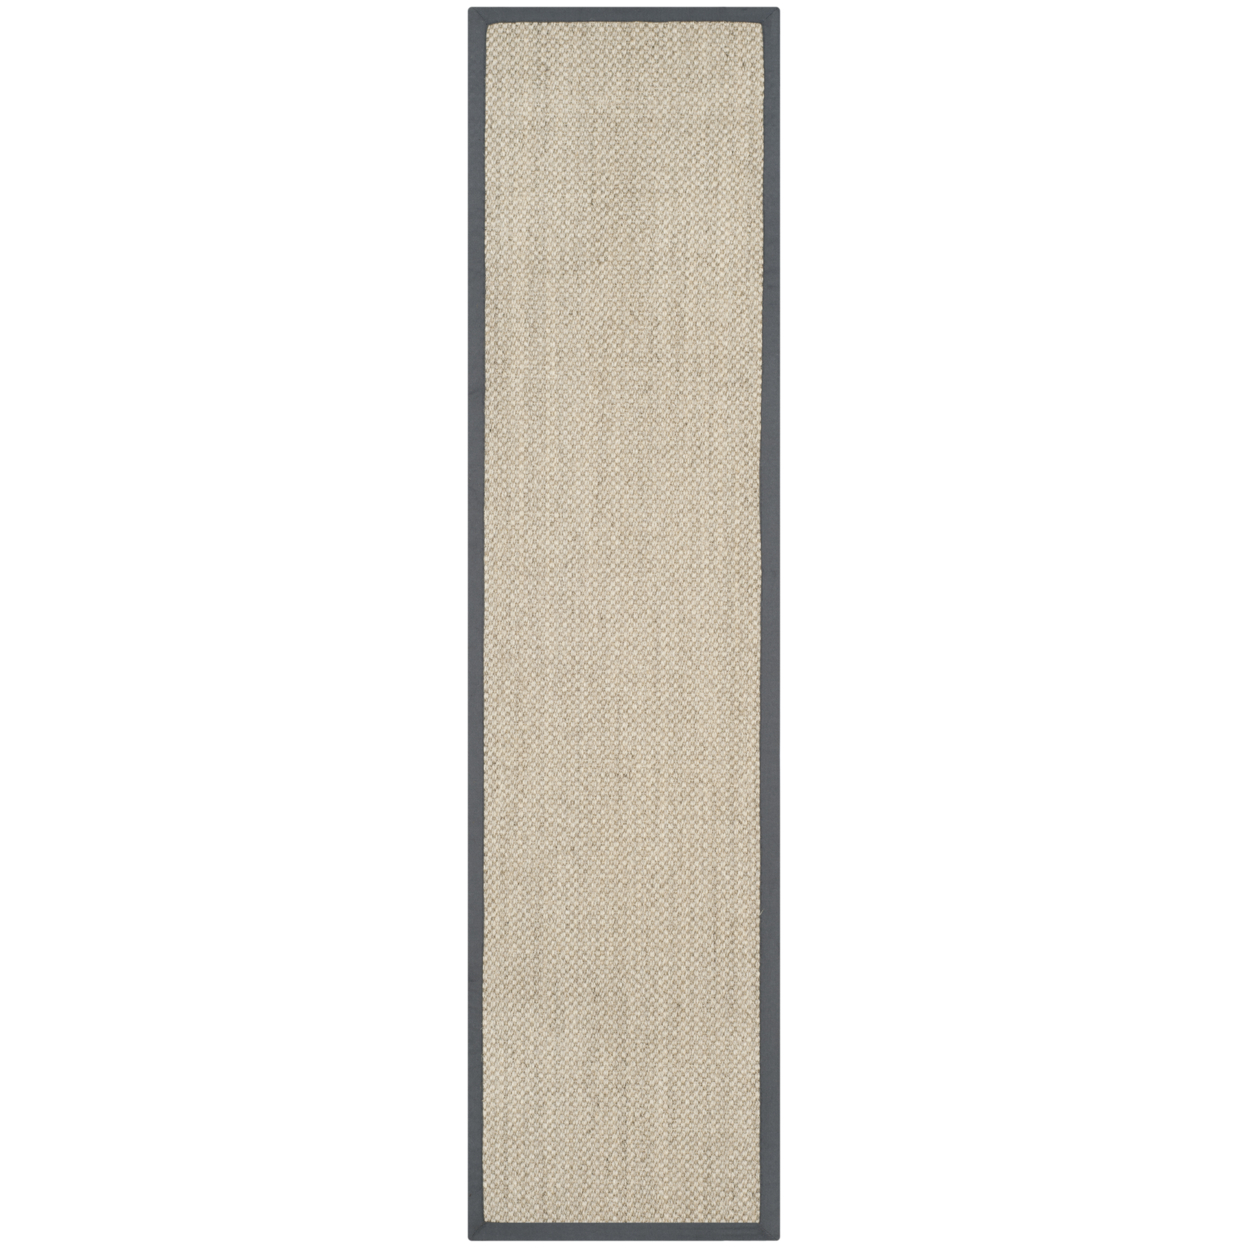 SAFAVIEH Natural Fiber Collection NF443B Marble/Grey Rug - 9' X 12'